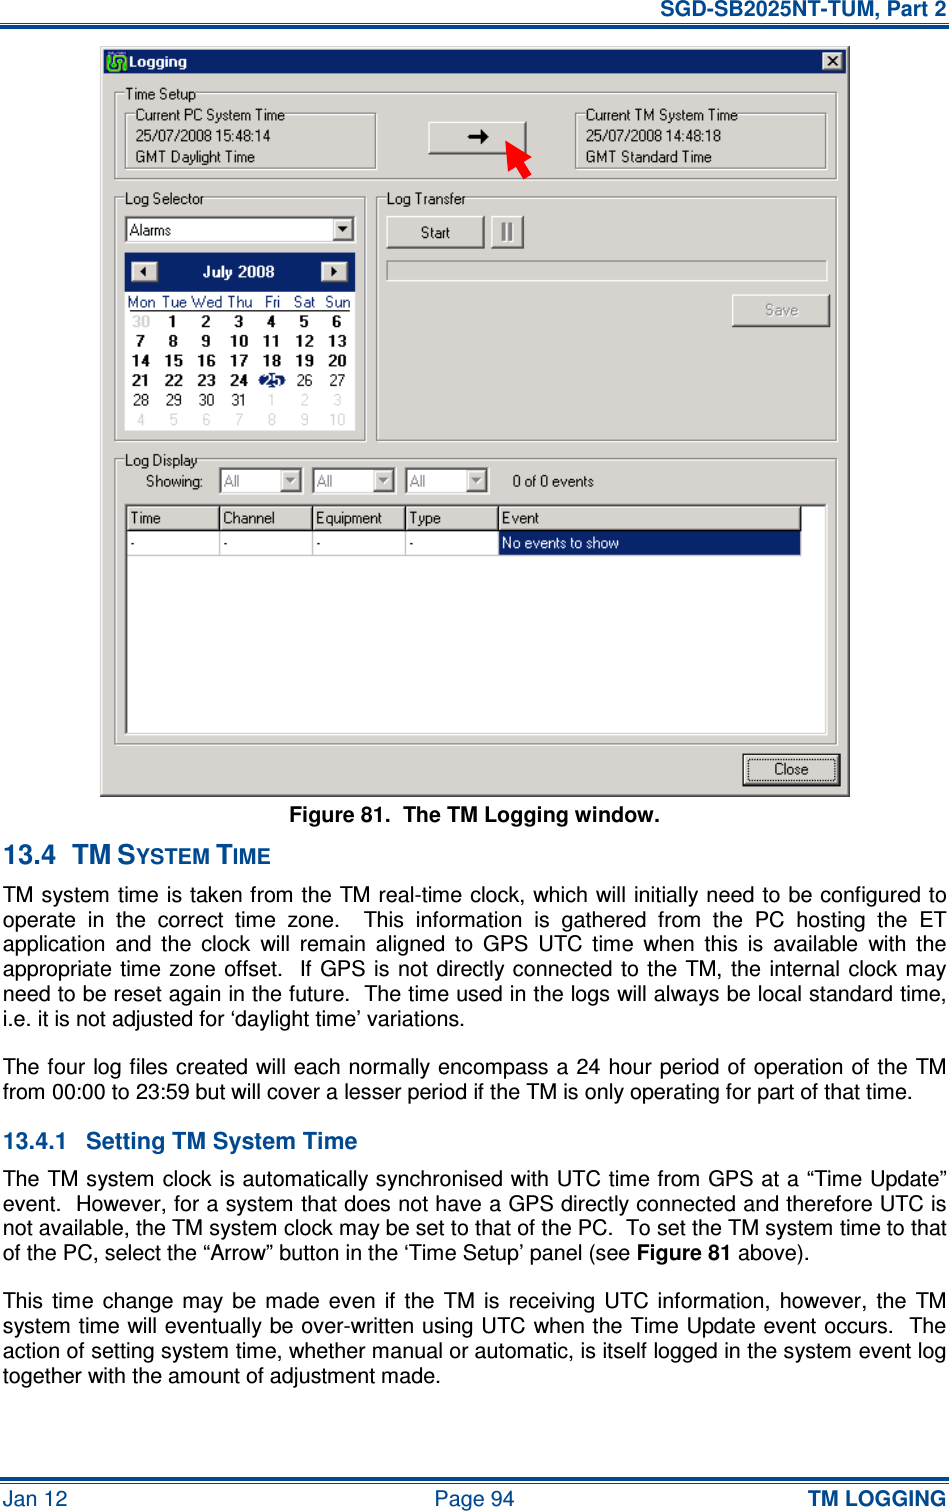   SGD-SB2025NT-TUM, Part 2 Jan 12  Page 94 TM LOGGING Figure 81.  The TM Logging window. 13.4  TM SYSTEM TIME TM system time is taken from the TM real-time clock, which will initially need to be configured to operate  in  the  correct  time  zone.    This  information  is  gathered  from  the  PC  hosting  the  ET application  and  the  clock  will  remain  aligned  to  GPS  UTC  time  when  this  is  available  with  the appropriate time zone  offset.    If  GPS  is  not  directly connected  to  the TM, the  internal clock may need to be reset again in the future.  The time used in the logs will always be local standard time, i.e. it is not adjusted for ‘daylight time’ variations. The four log files created will each normally encompass a 24 hour period of operation of the TM from 00:00 to 23:59 but will cover a lesser period if the TM is only operating for part of that time. 13.4.1  Setting TM System Time The TM system clock is automatically synchronised with UTC time from GPS at a “Time Update” event.  However, for a system that does not have a GPS directly connected and therefore UTC is not available, the TM system clock may be set to that of the PC.  To set the TM system time to that of the PC, select the “Arrow” button in the ‘Time Setup’ panel (see Figure 81 above). This  time  change  may  be  made  even  if  the  TM  is  receiving  UTC  information,  however,  the  TM system time will eventually be over-written using UTC when the Time Update event occurs.  The action of setting system time, whether manual or automatic, is itself logged in the system event log together with the amount of adjustment made. 